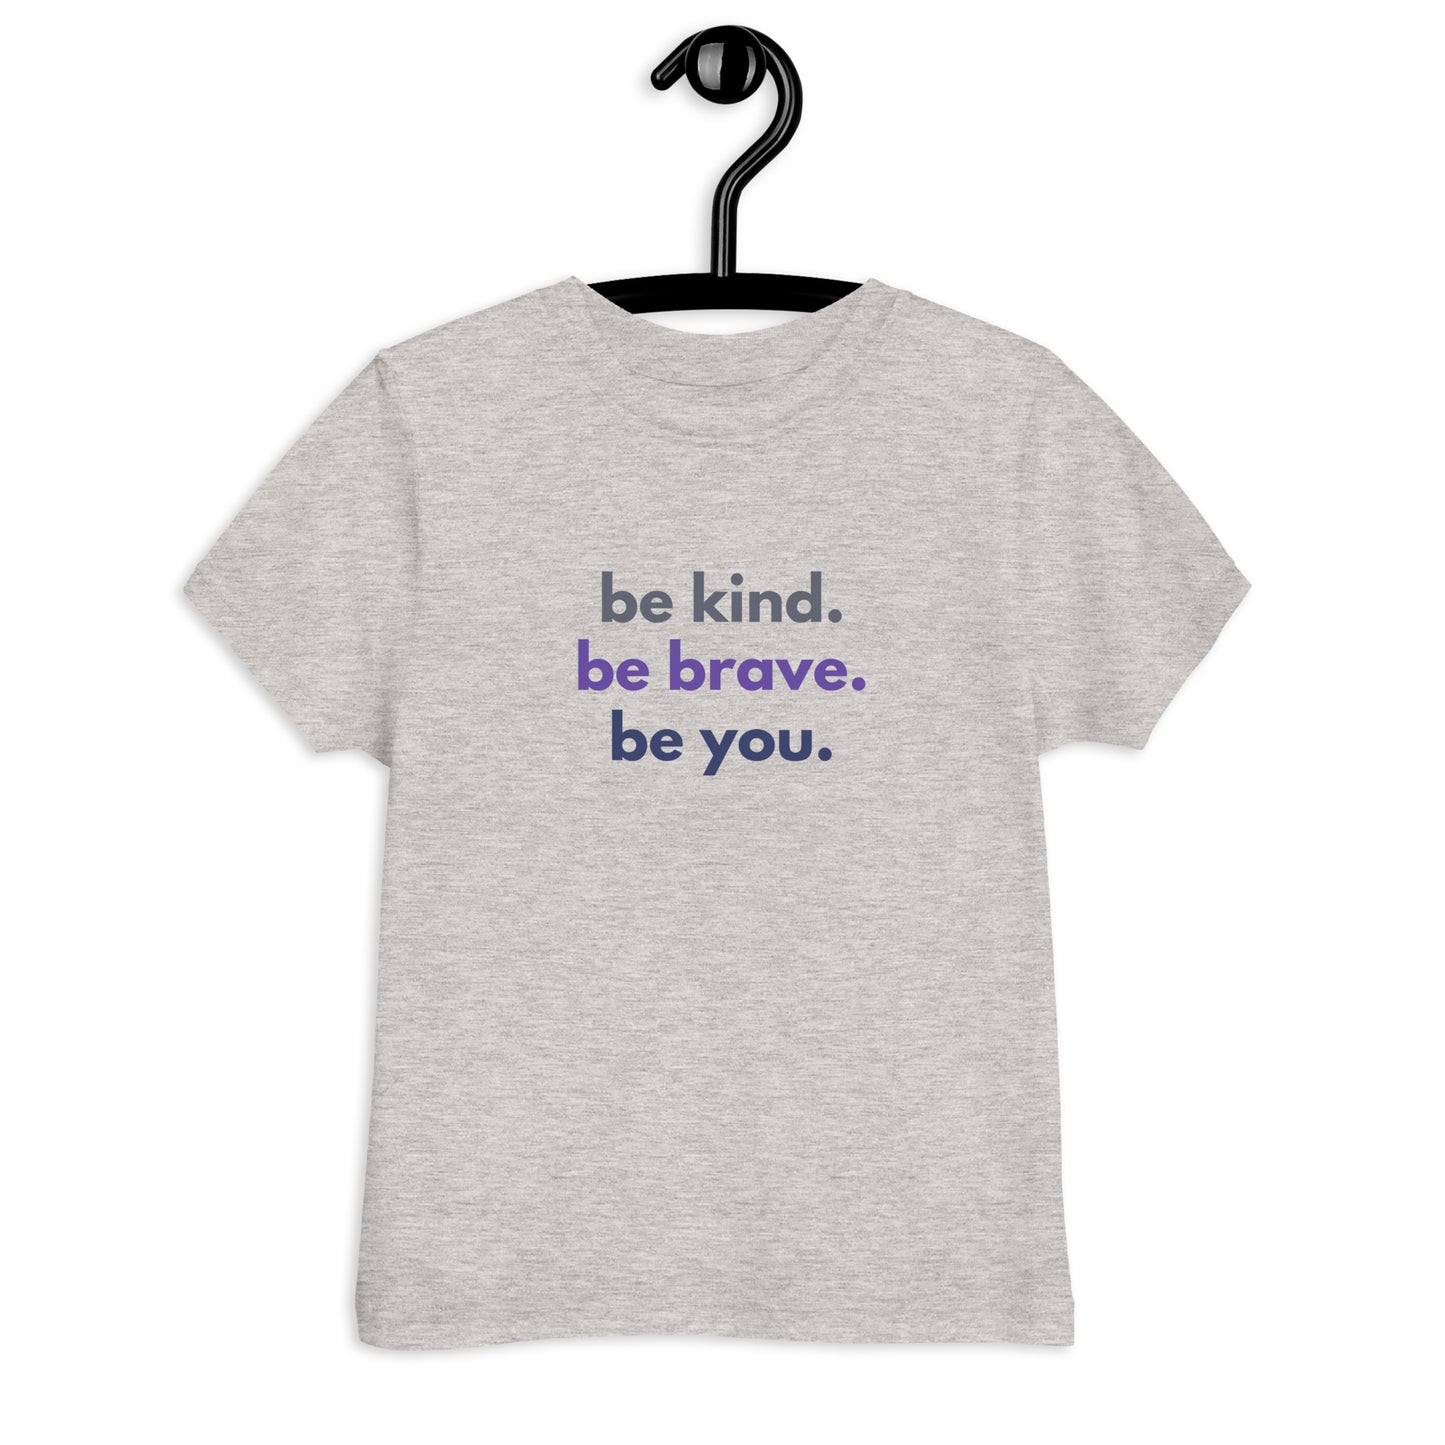 Toddler jersey t-shirt - Be kind. Be brave. Be you.